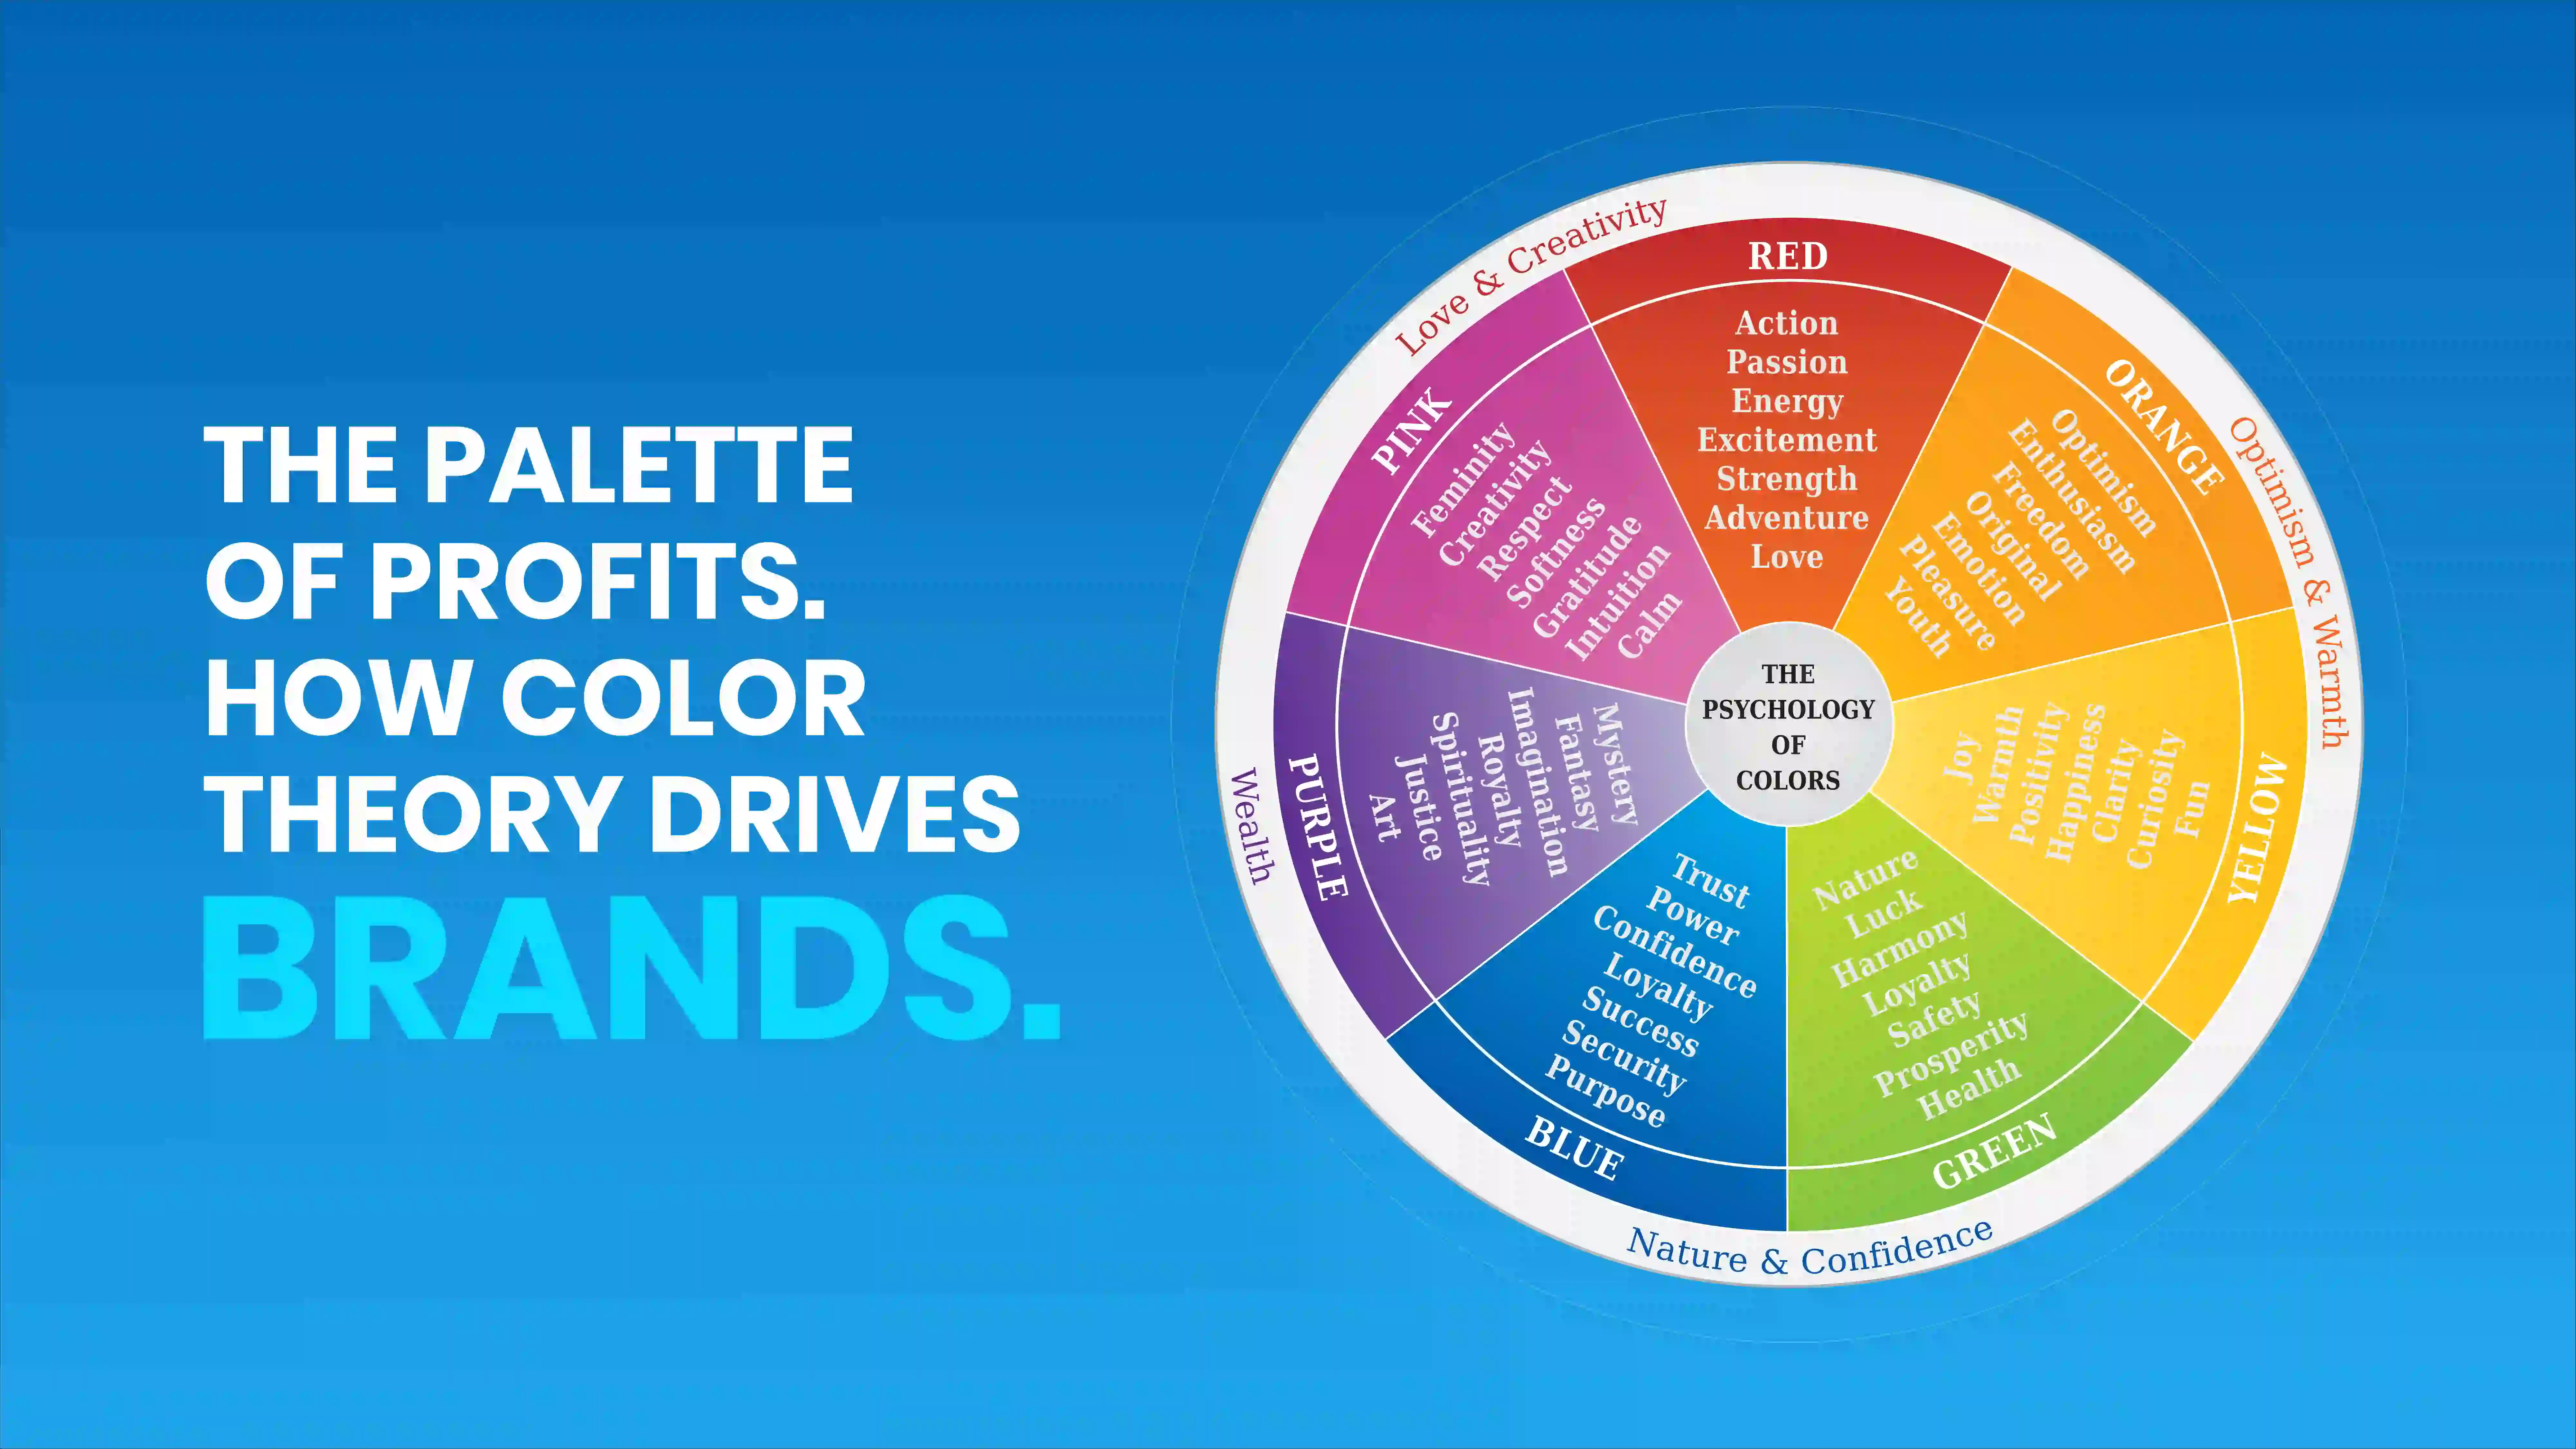 The Palette of Profits: how color theory drives brands.